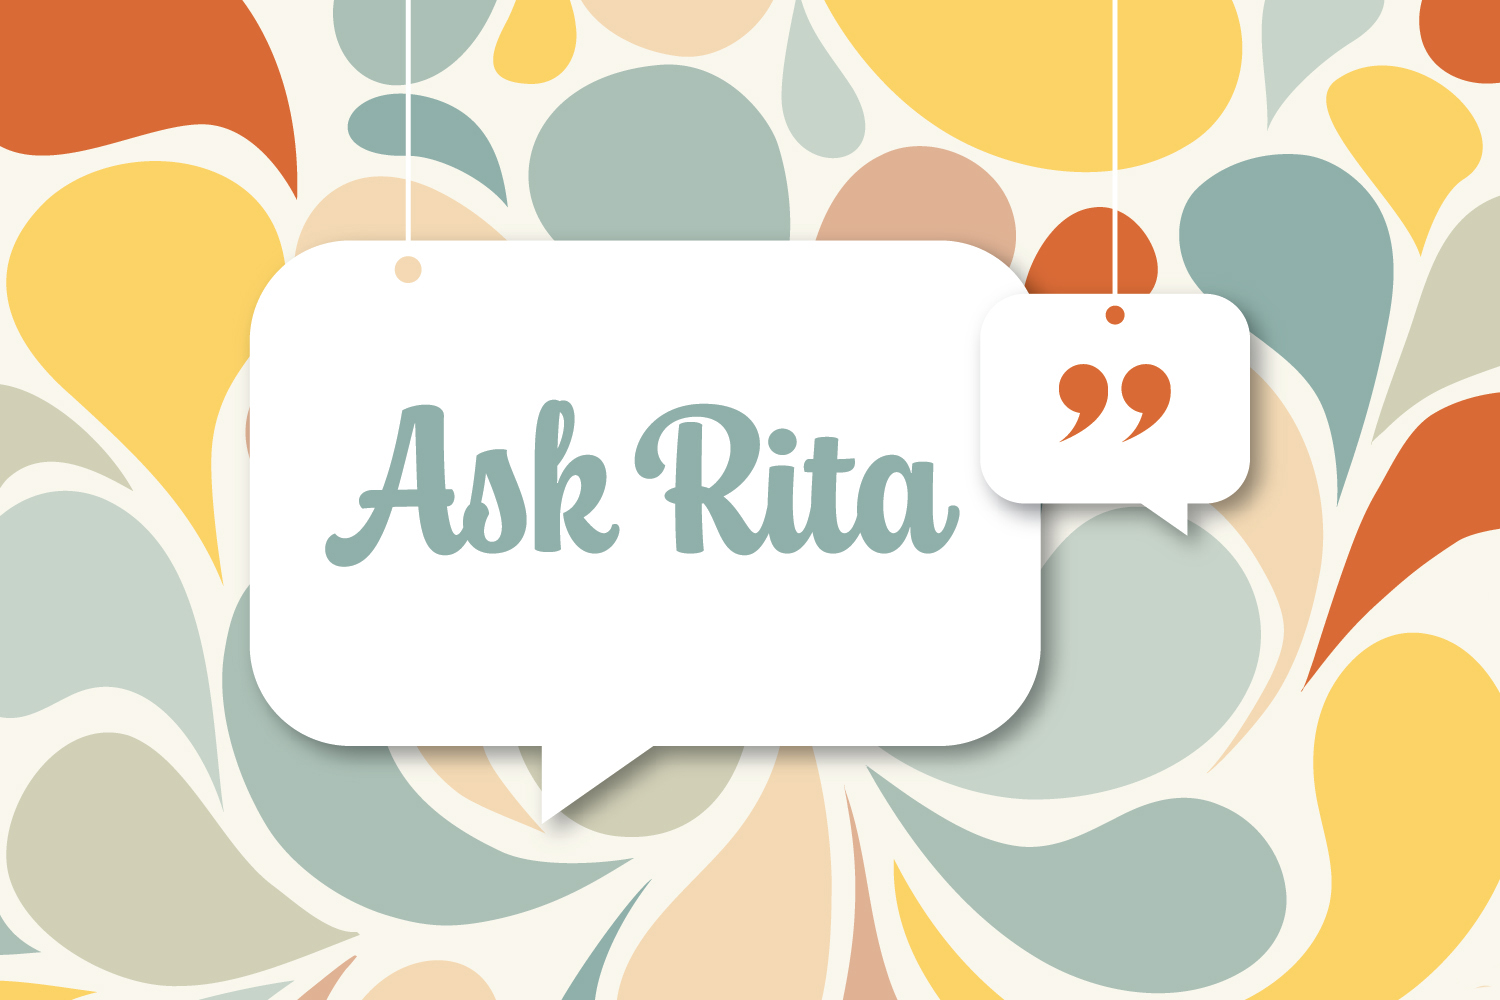 Ask Rita in HR: Do we really have to do performance evaluations?